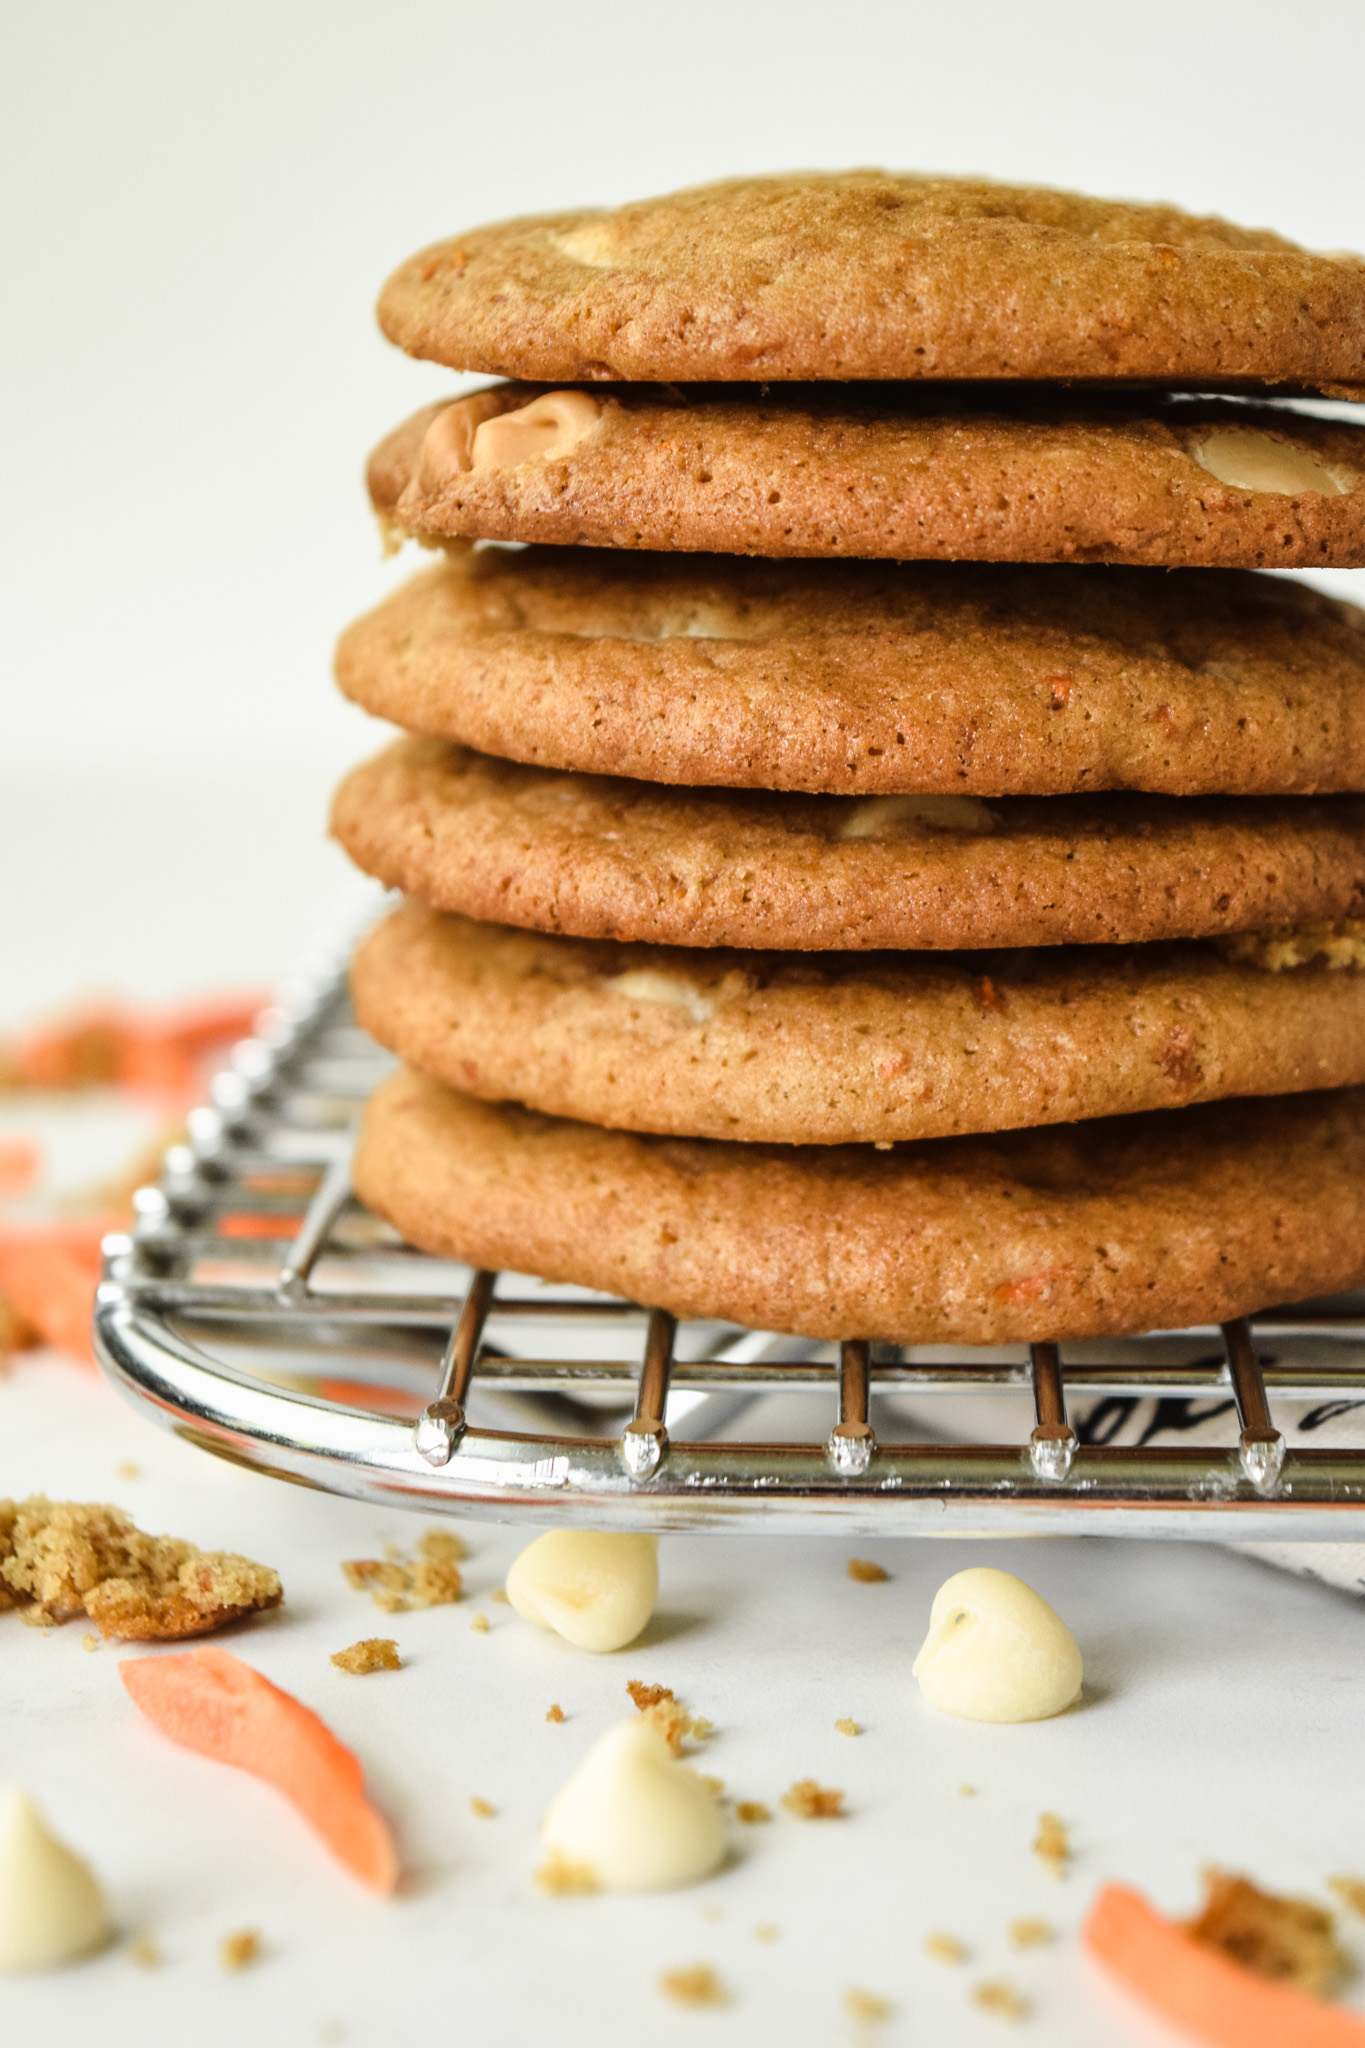 Stack of Gluten Free Carrot Cake Cookies